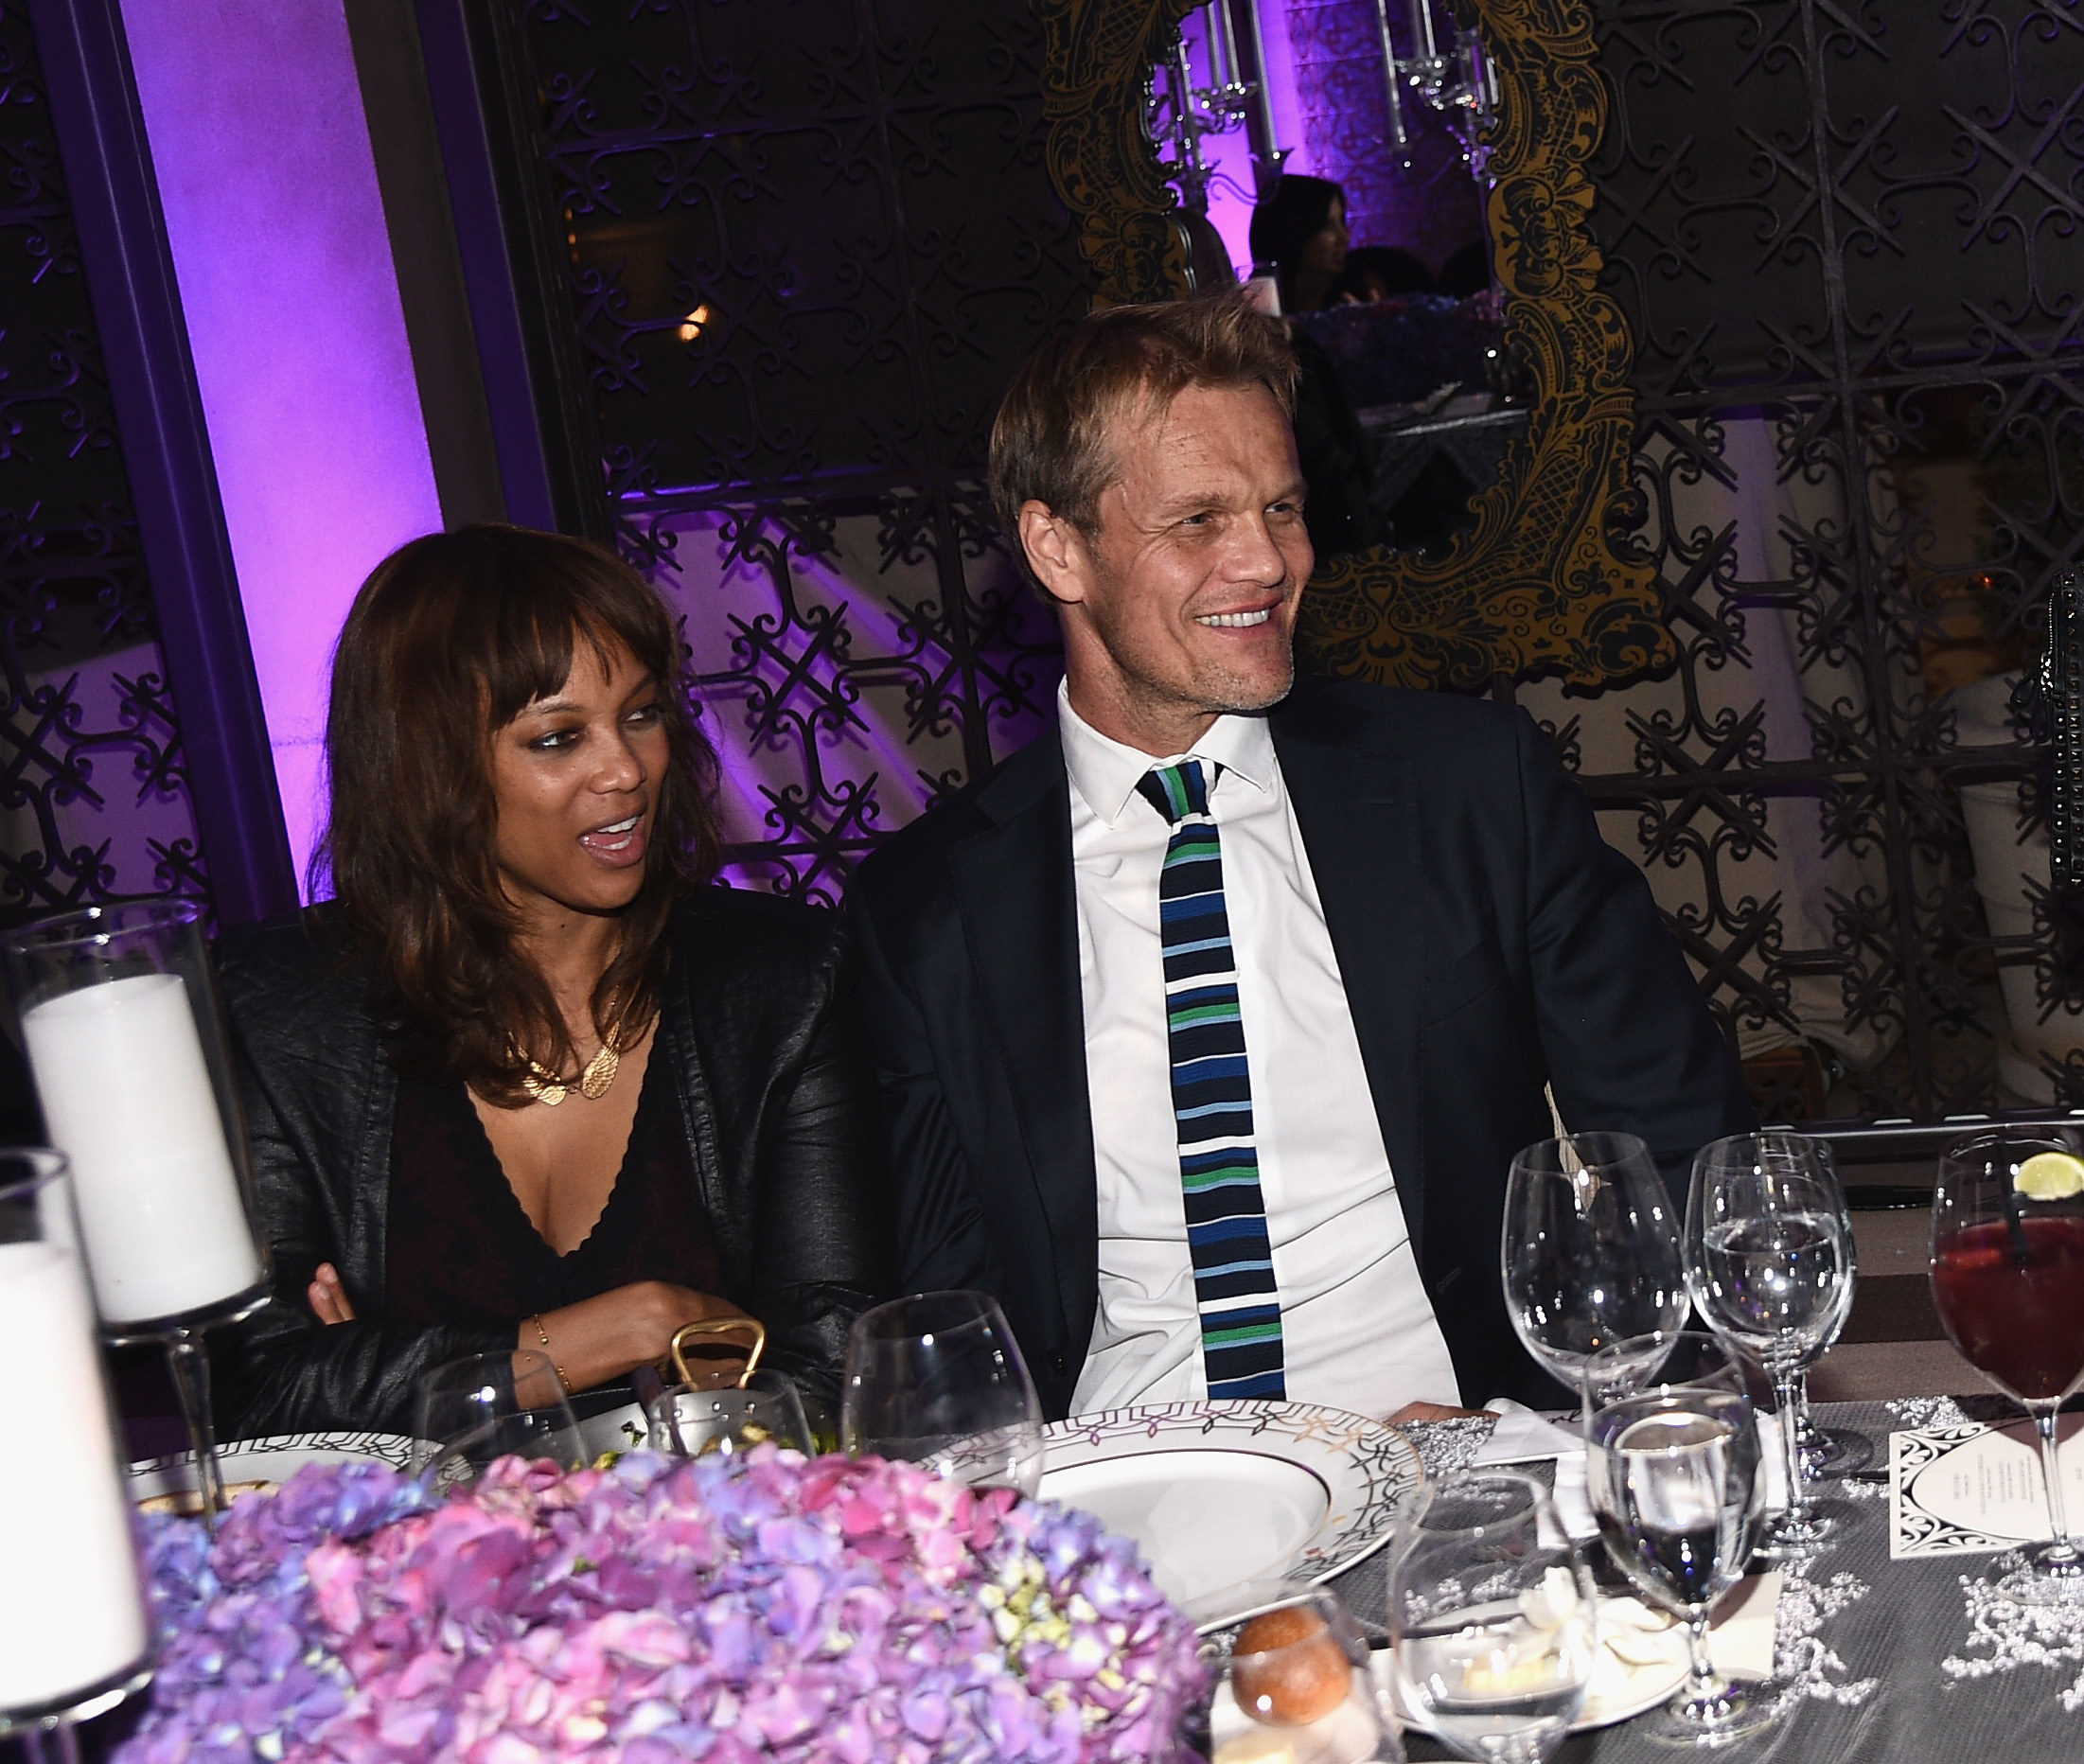 Tyra Banks and Erik Asla sit at their table during the August Getty Atelier Dinner on November 19, 2014